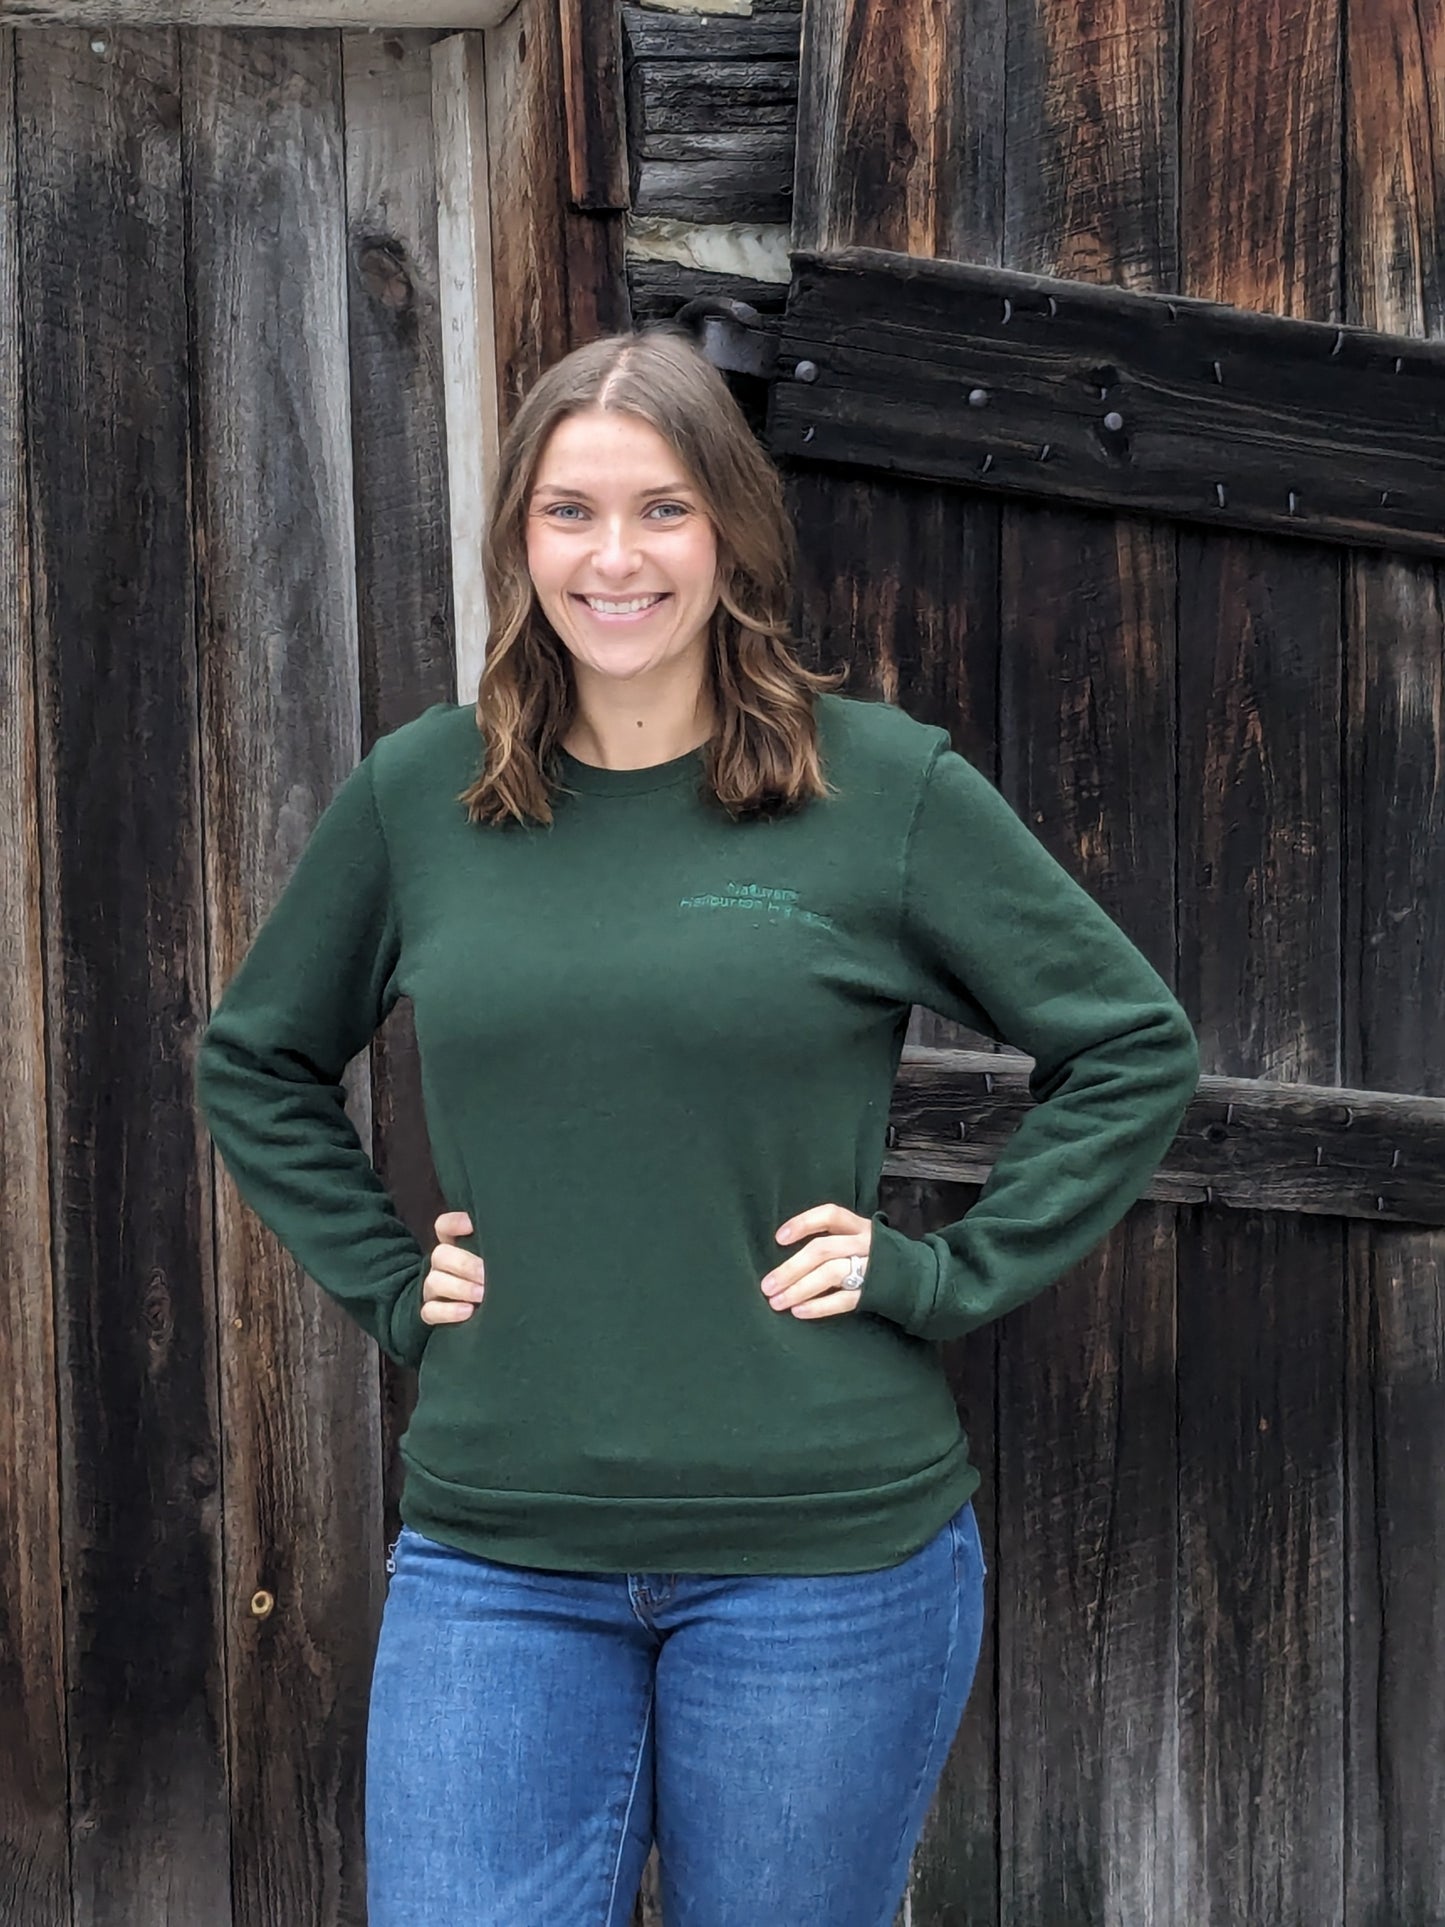 Naturally Haliburton Highlands in dark forest green subtle embroidery upper left chest. Forest green crew neck unisex sweatshirt.Small Town Natural model Morgan is wearing a Unisex size Small. She typically wears a size Medium in Women's sweatshirts.